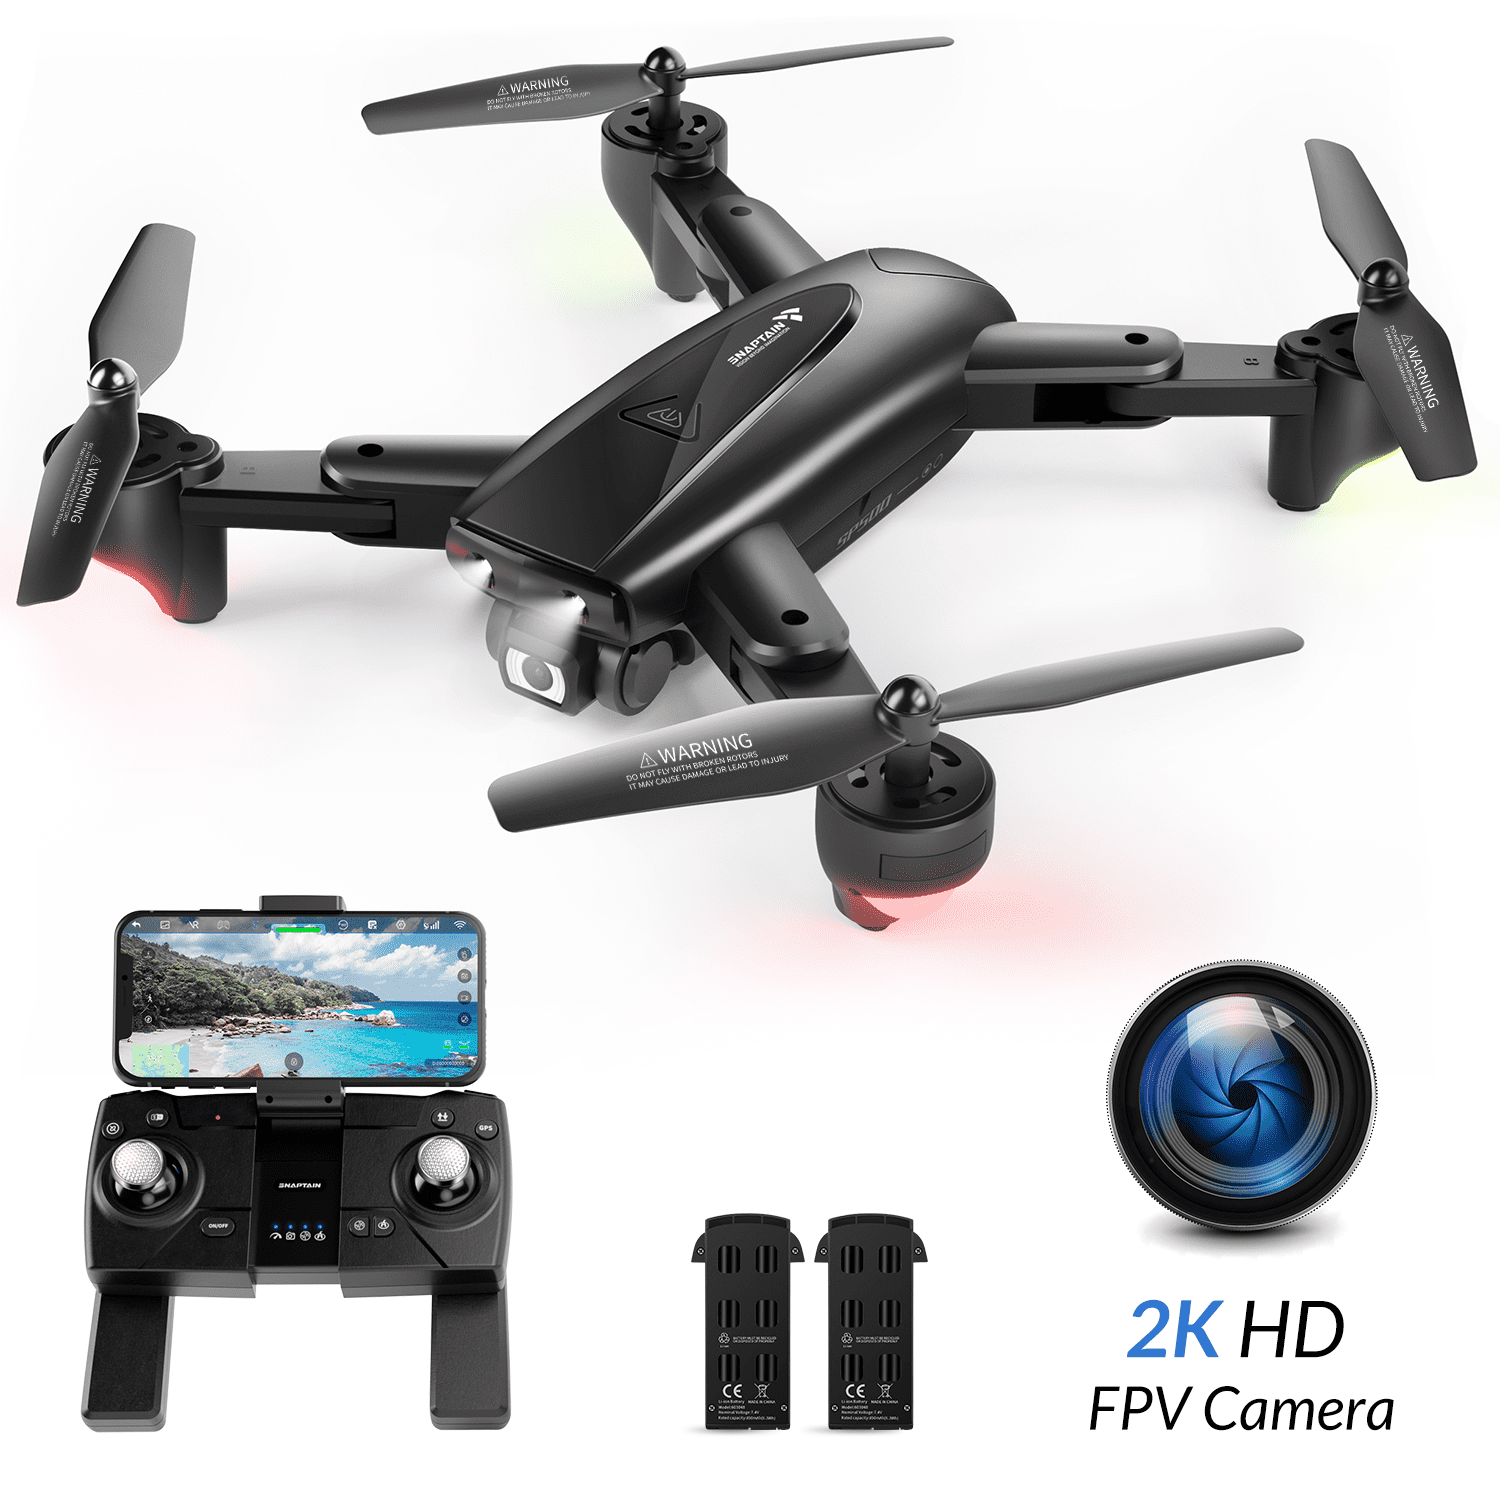 Auto Hover SNAPTAIN SP500 GPS 5G WiFi Transmission FPV Drone with 1080P HD Camera Foldable Drone for Beginners and Adults RC Quadcopter with GPS Return Home Follow Me Gesture Control Circle Fly 